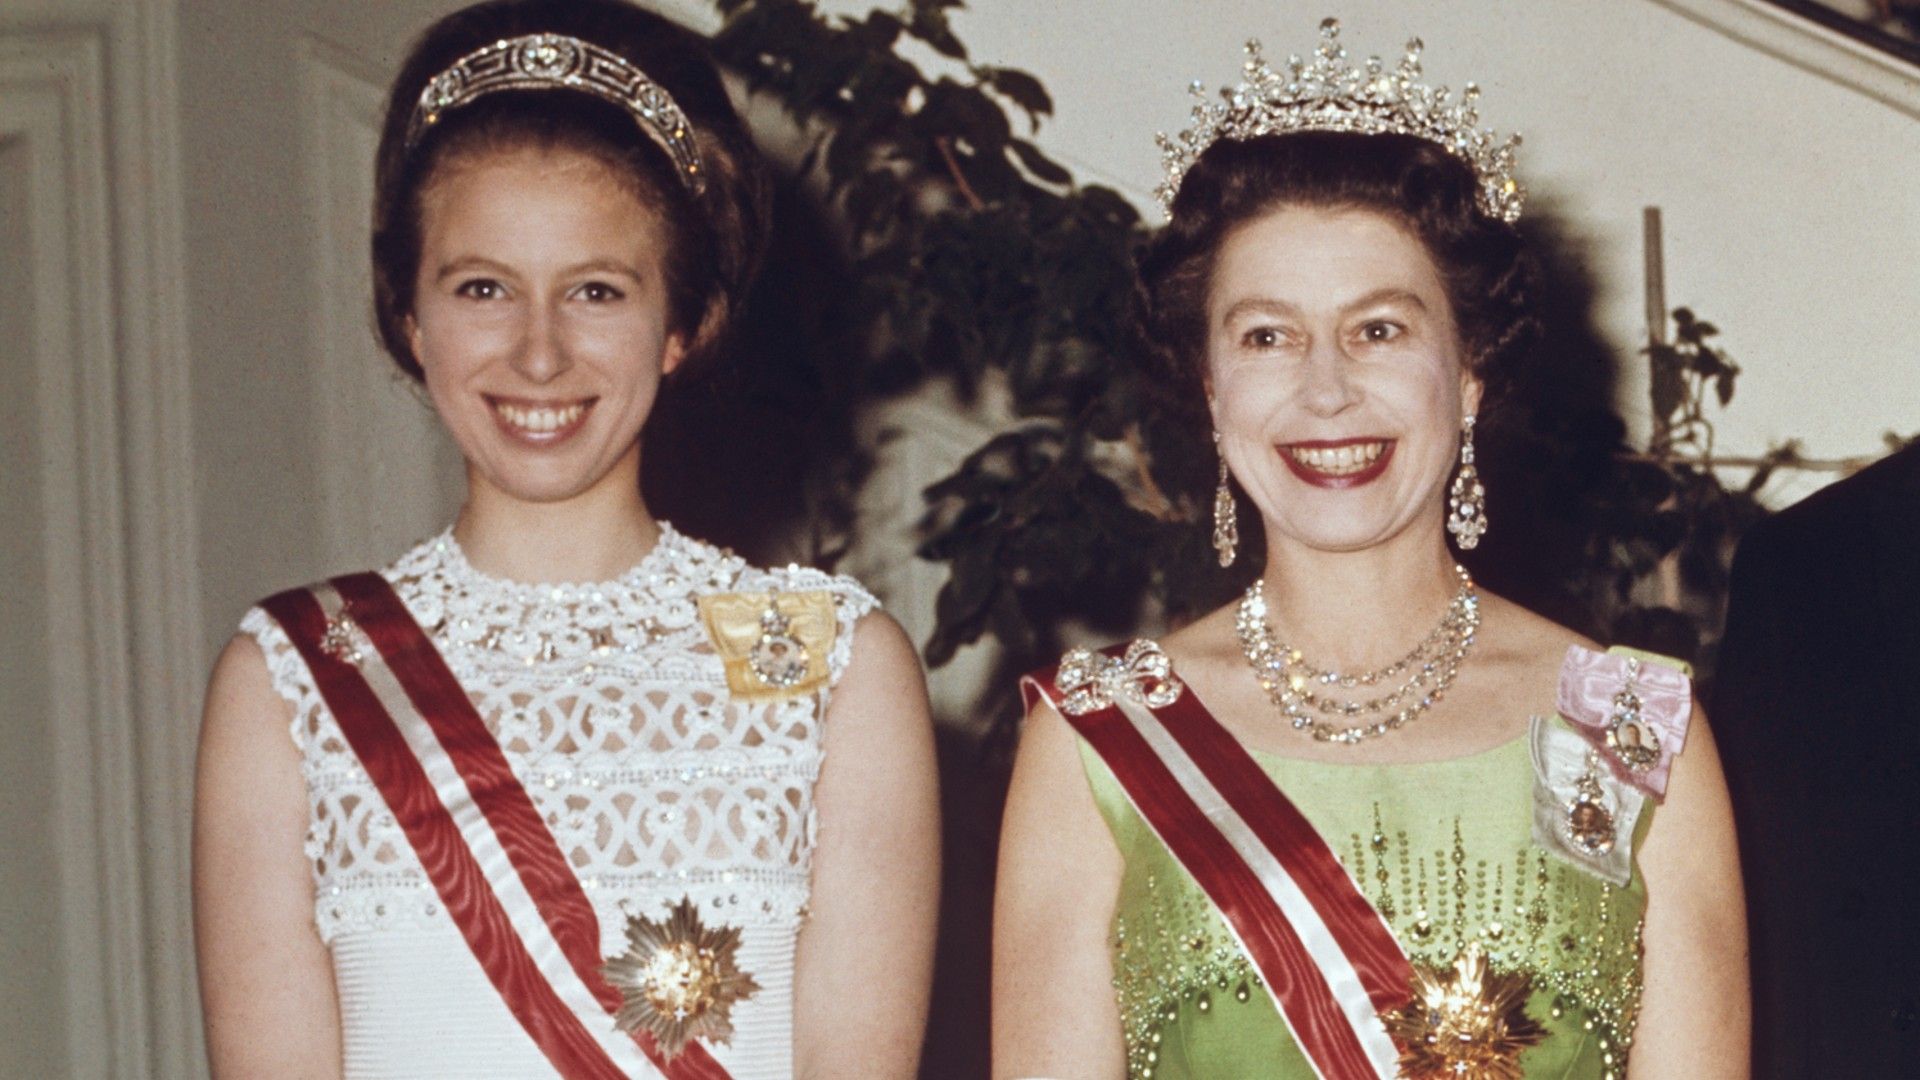 <p>                     In 1969, the Queen, Prince Philip, and their only daughter, Princess Anne, undertook a visit to Austria. The family started their tour in Vienna, where they visited the Spanish Riding School, took in a Horse Show, and attended a glamorous Gala Reception held by the Austrian President at the time, Franz Jonas.                   </p>                                      <p>                     But arguably the highlight of the proceedings in Vienna was when Anne, the Queen and Philip hosted a Return Banquet for the Austrian President. For the special evening, both Anne and her mother coordinated brilliantly in some fantastically glamorous outfits and tiaras.                   </p>                                      <p>                     While Anne wore a seriously chic white gown and tiara, the Queen matched her daughter in a stunning green ensemble, and the glittering Girls of Great Britain and Ireland Tiara, making for an iconic fashion moment.                   </p>